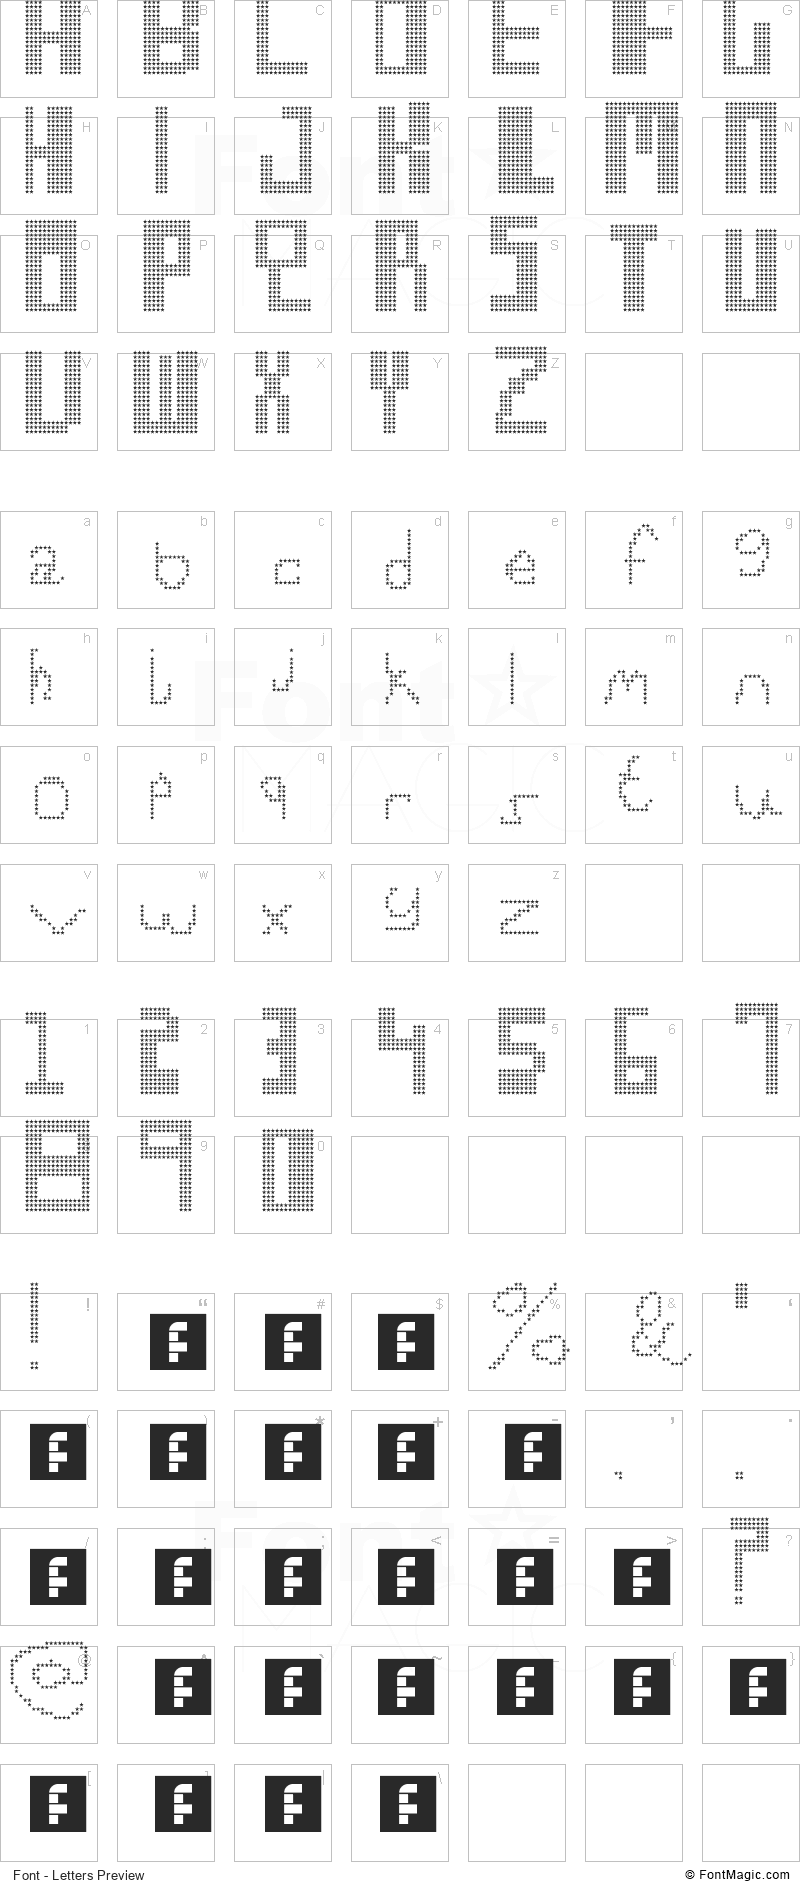 Syntax Zazz Font - All Latters Preview Chart